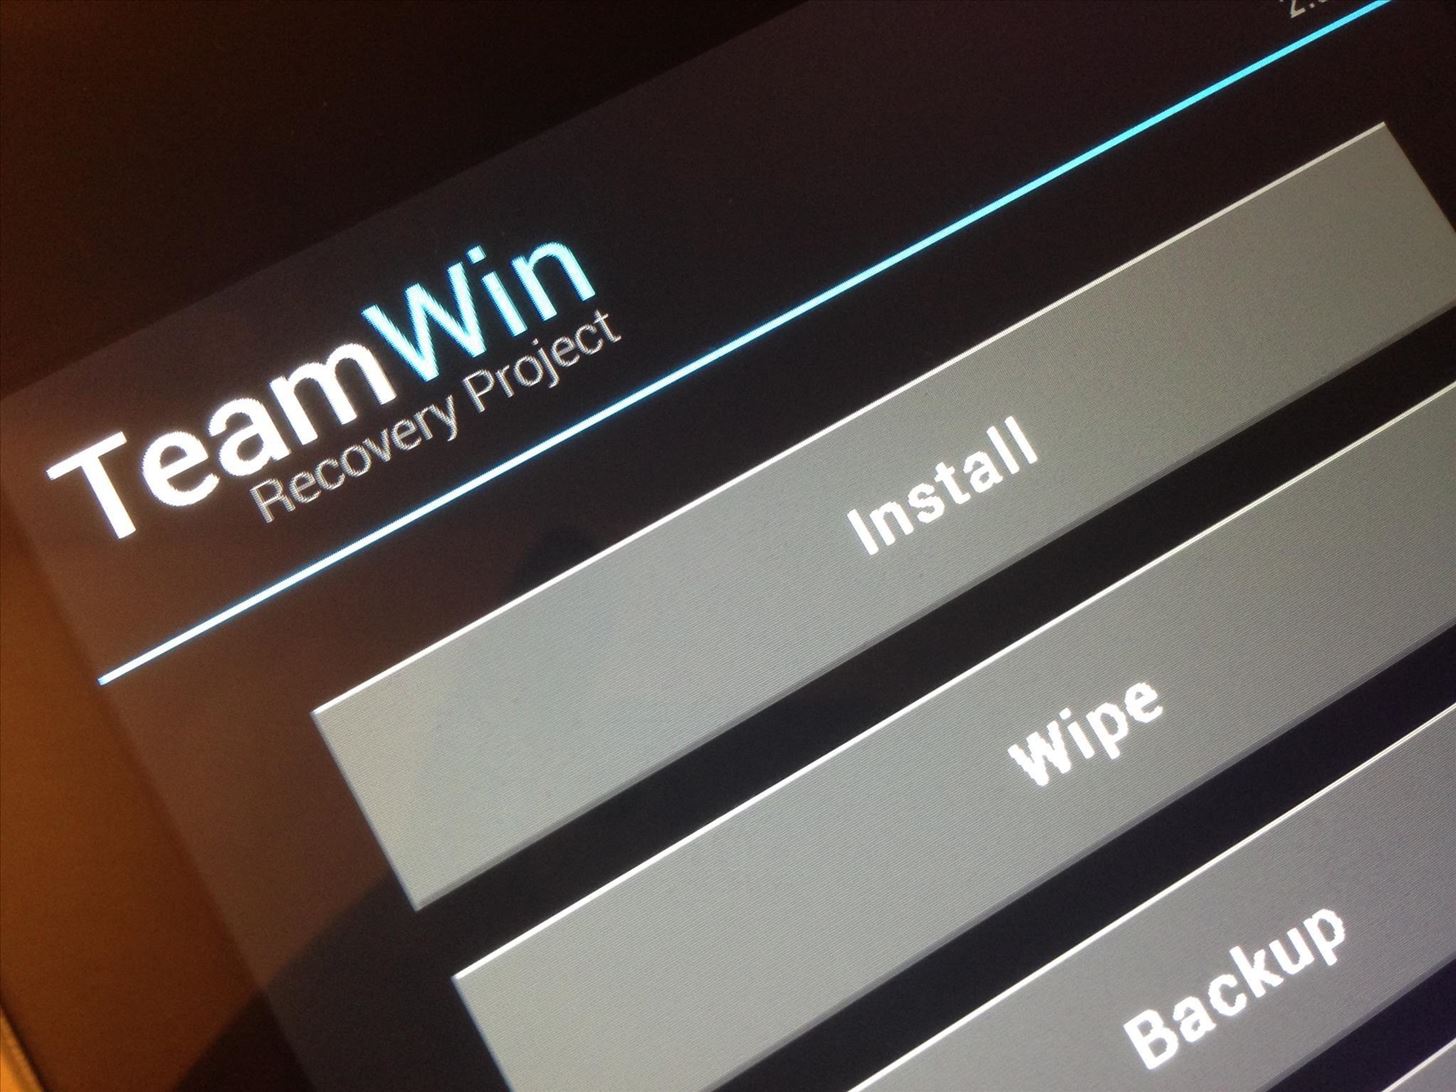 How to Customize Your TWRP Custom Recovery on Your Nexus 7 Tablet with Free Themes